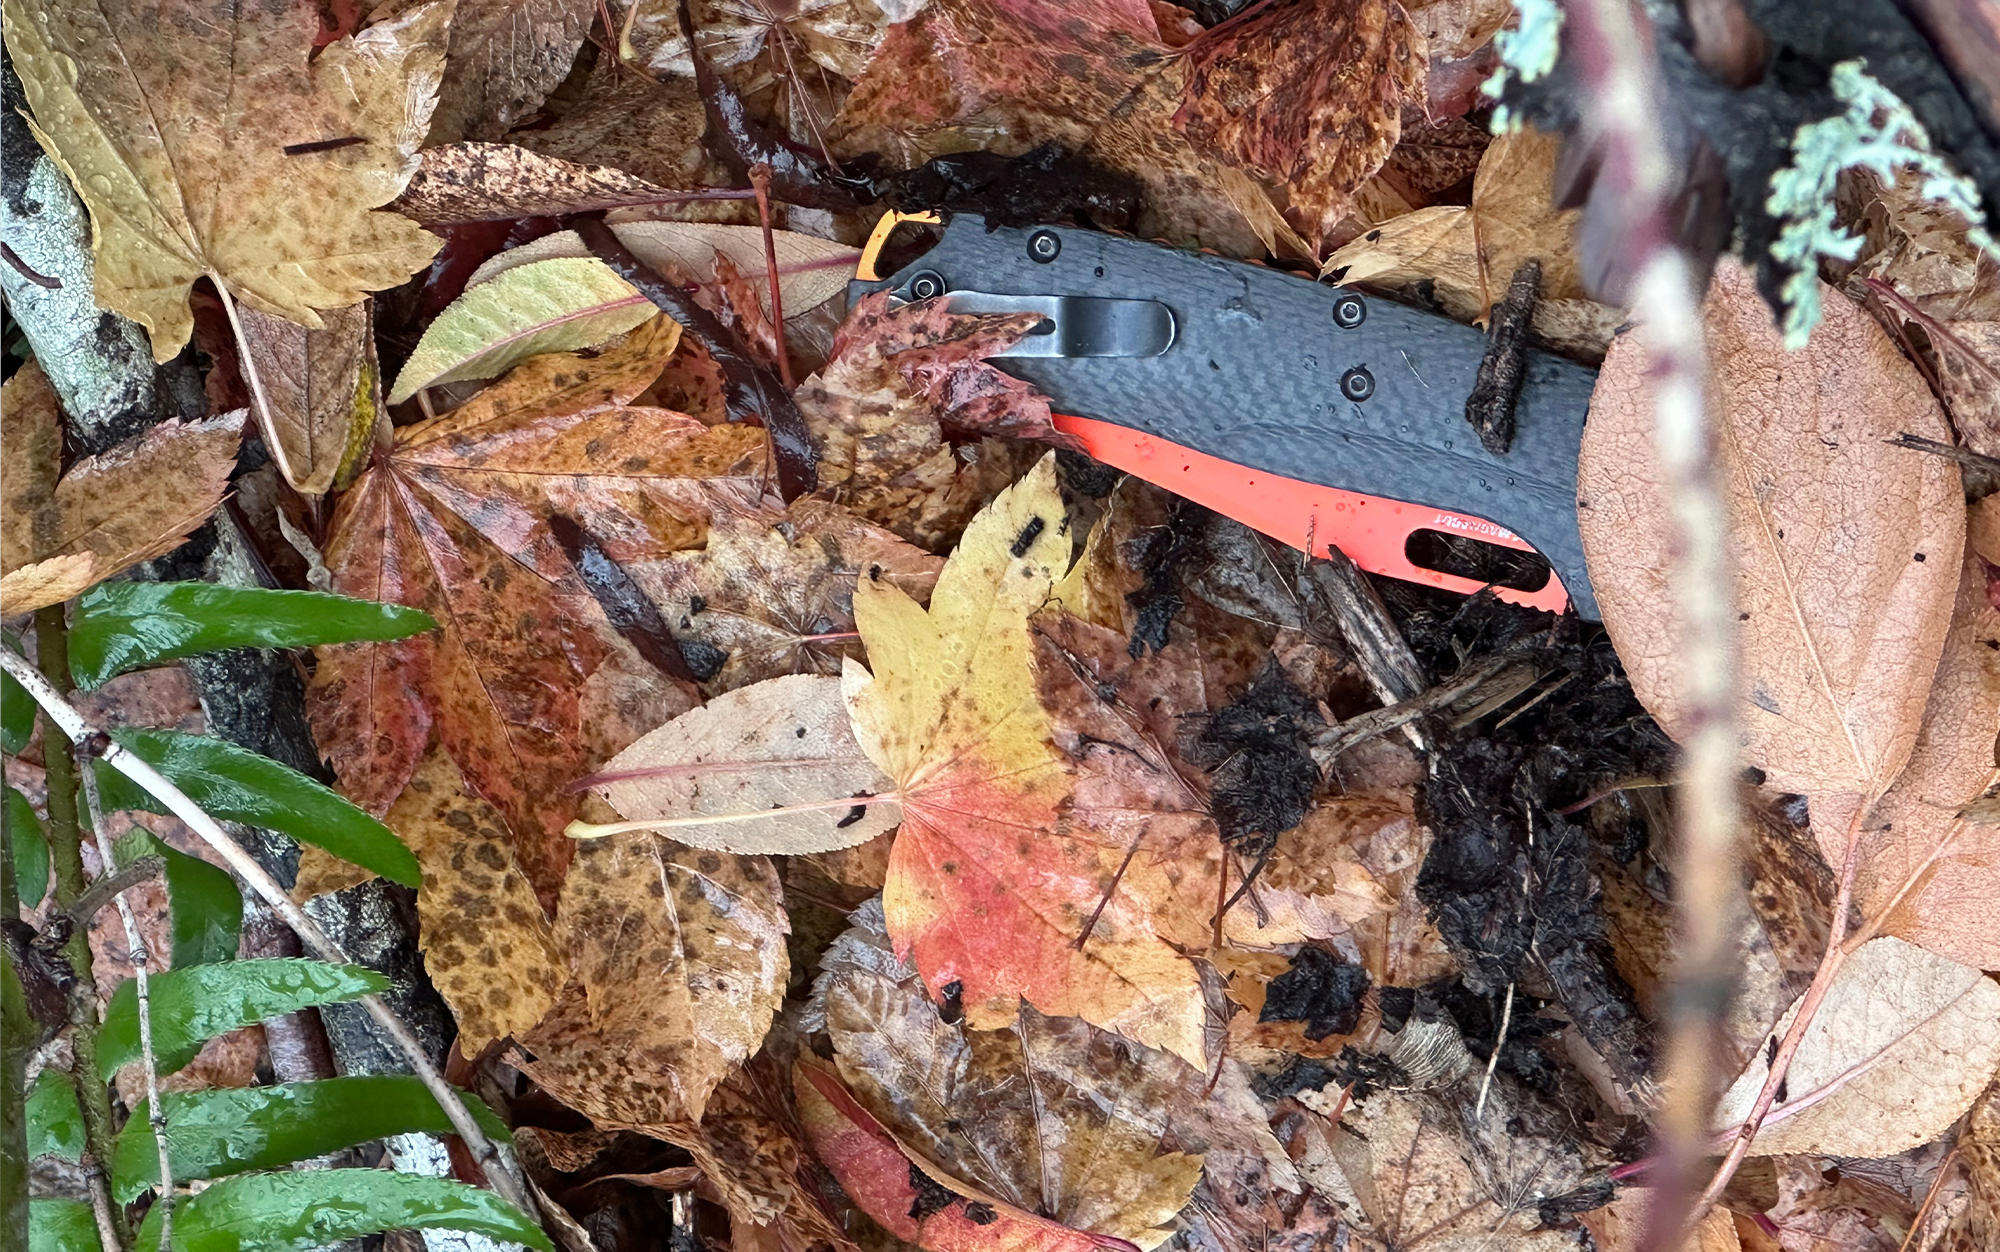 The Taggedout's blaze orange blade makes it easy to locate.